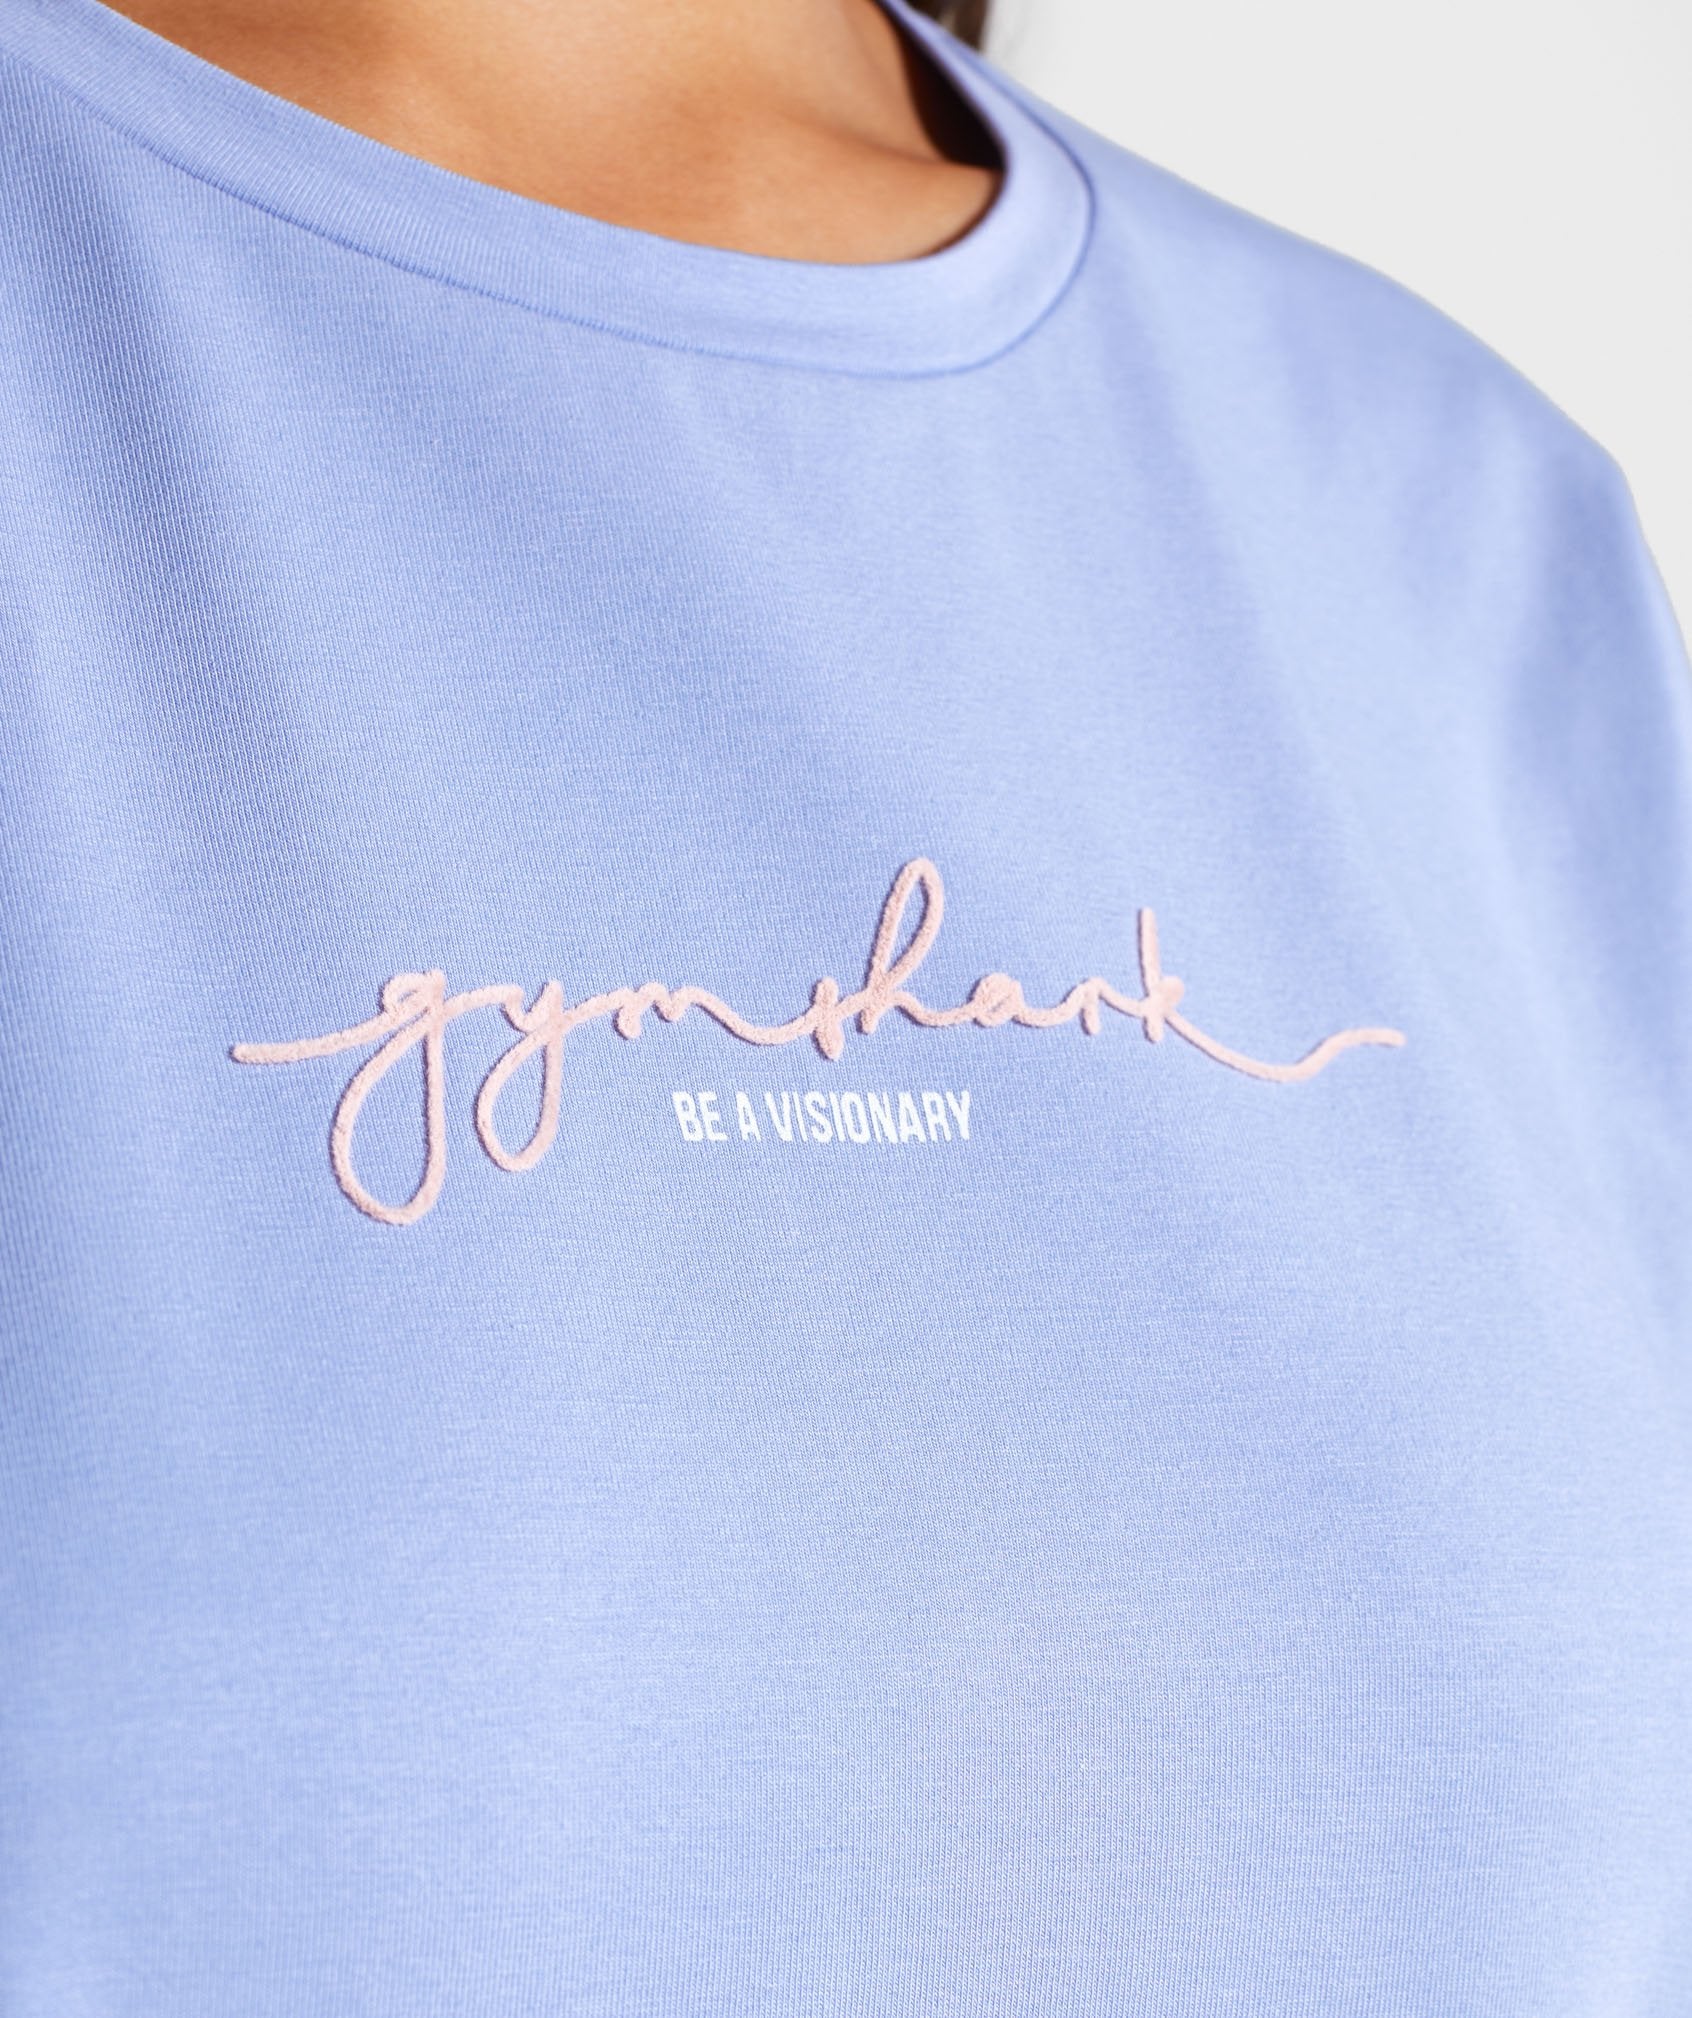 Signature Longline Tee in Light Blue - view 6